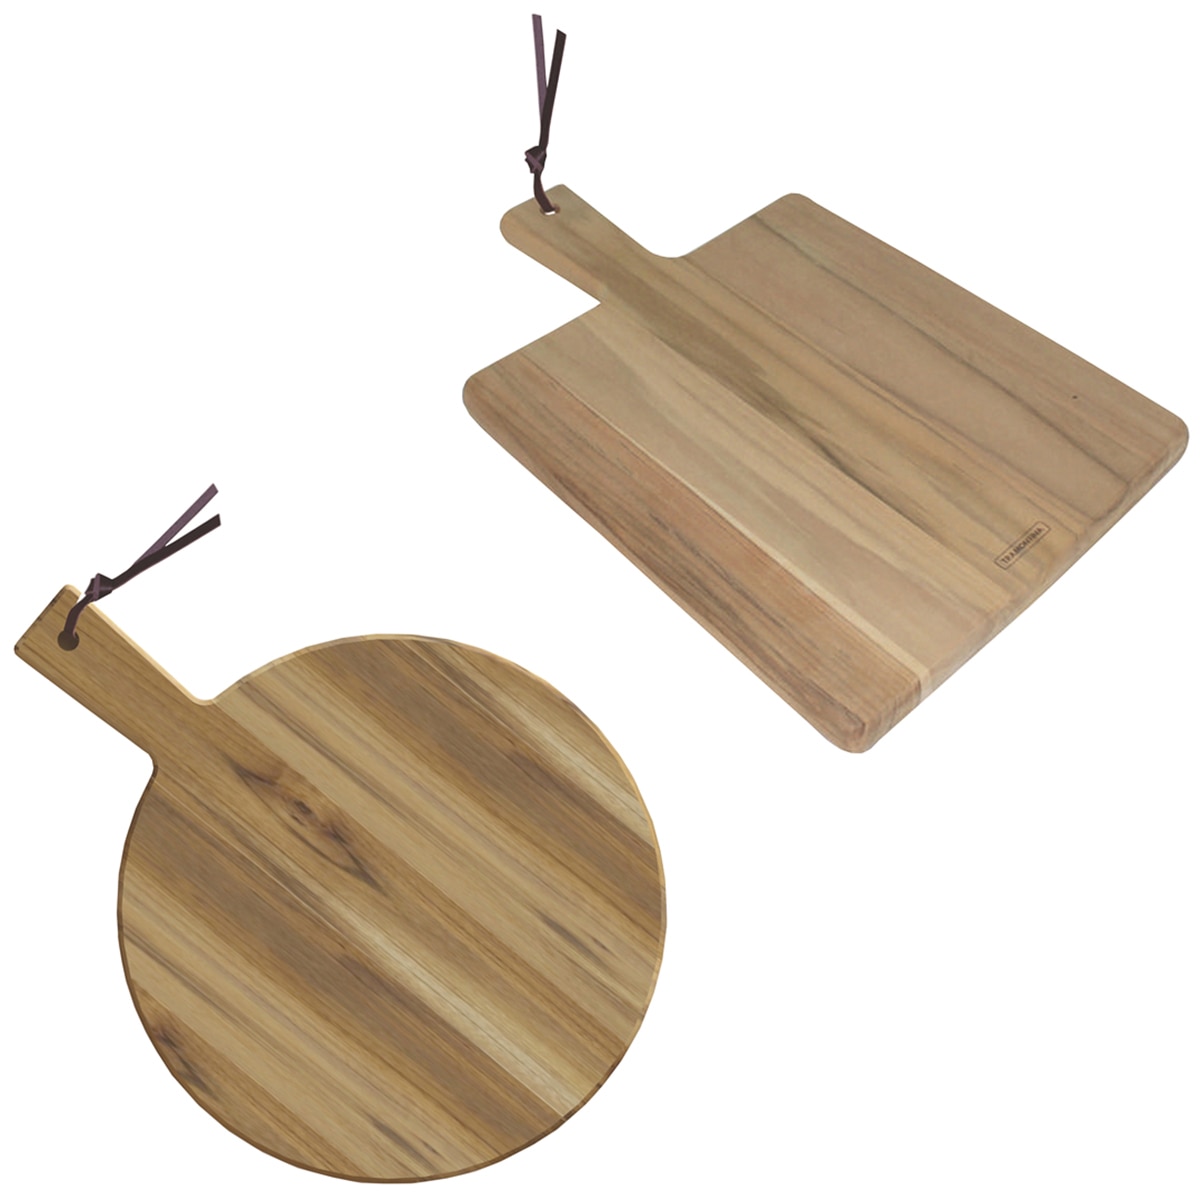 Tramontina Wooden Serving Boards with Handles- Round & Square